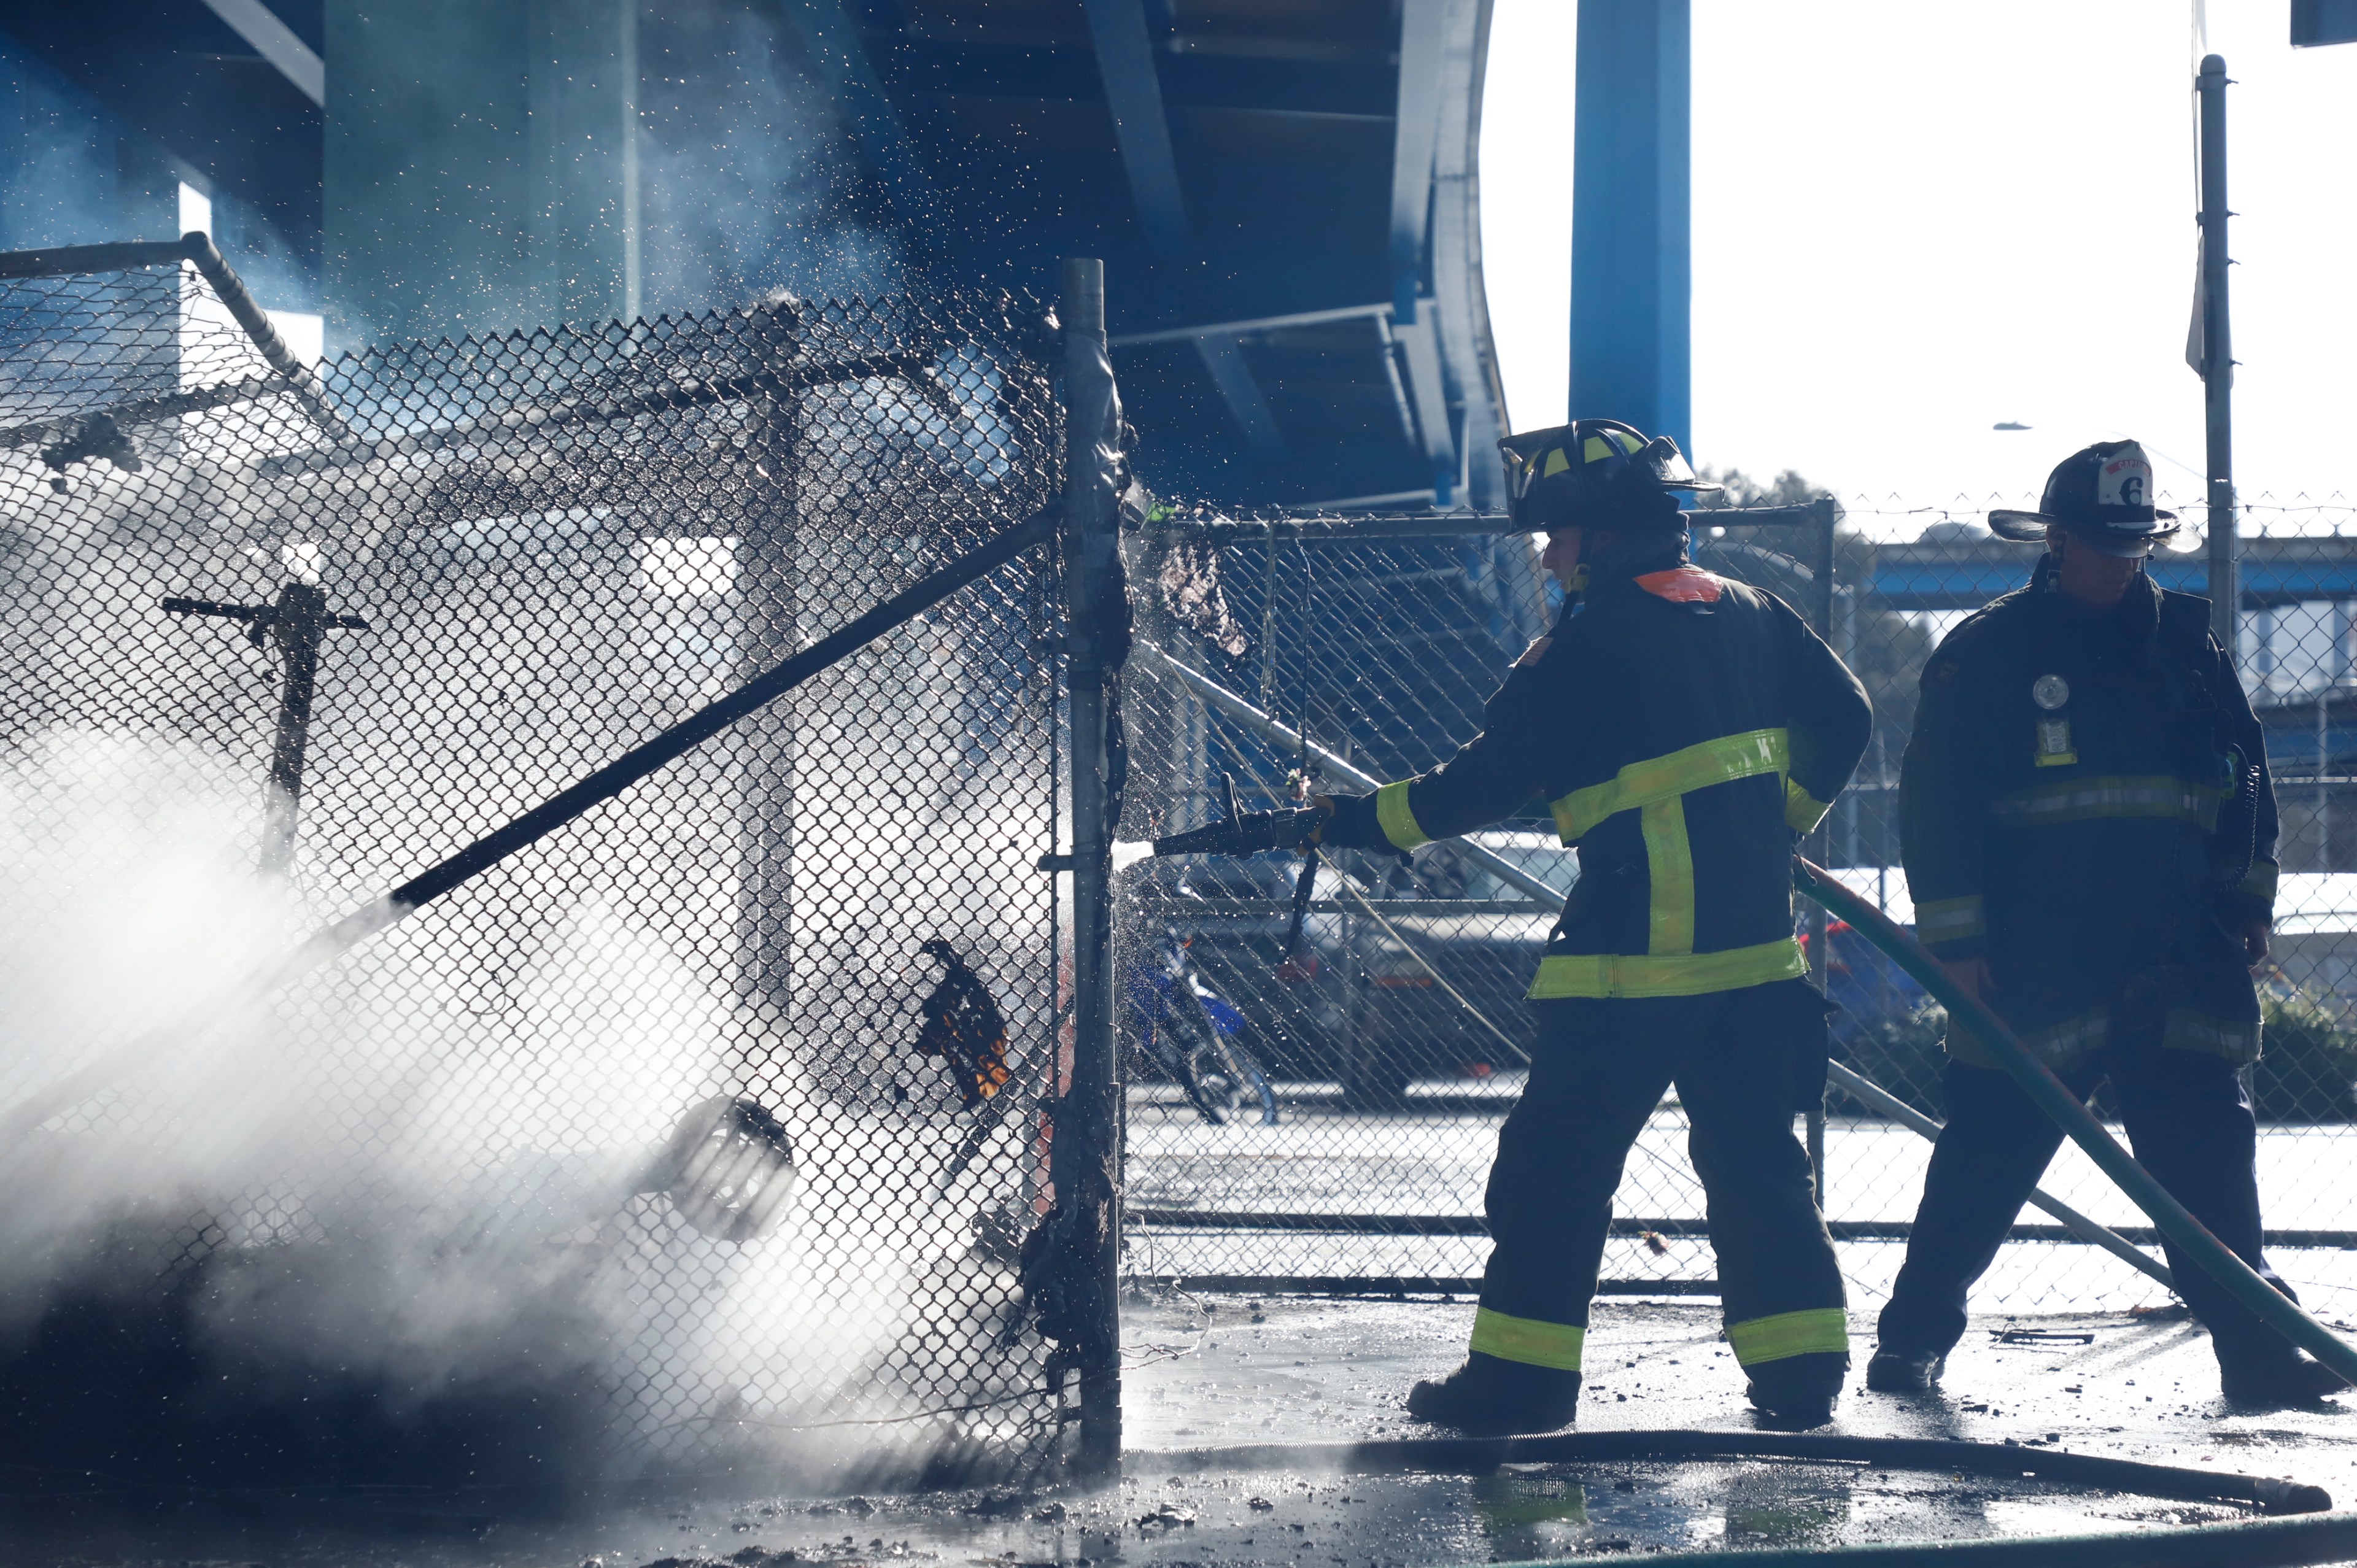 SFFD firefighters spray water on an active fire in a homeless encampment on Division Street.